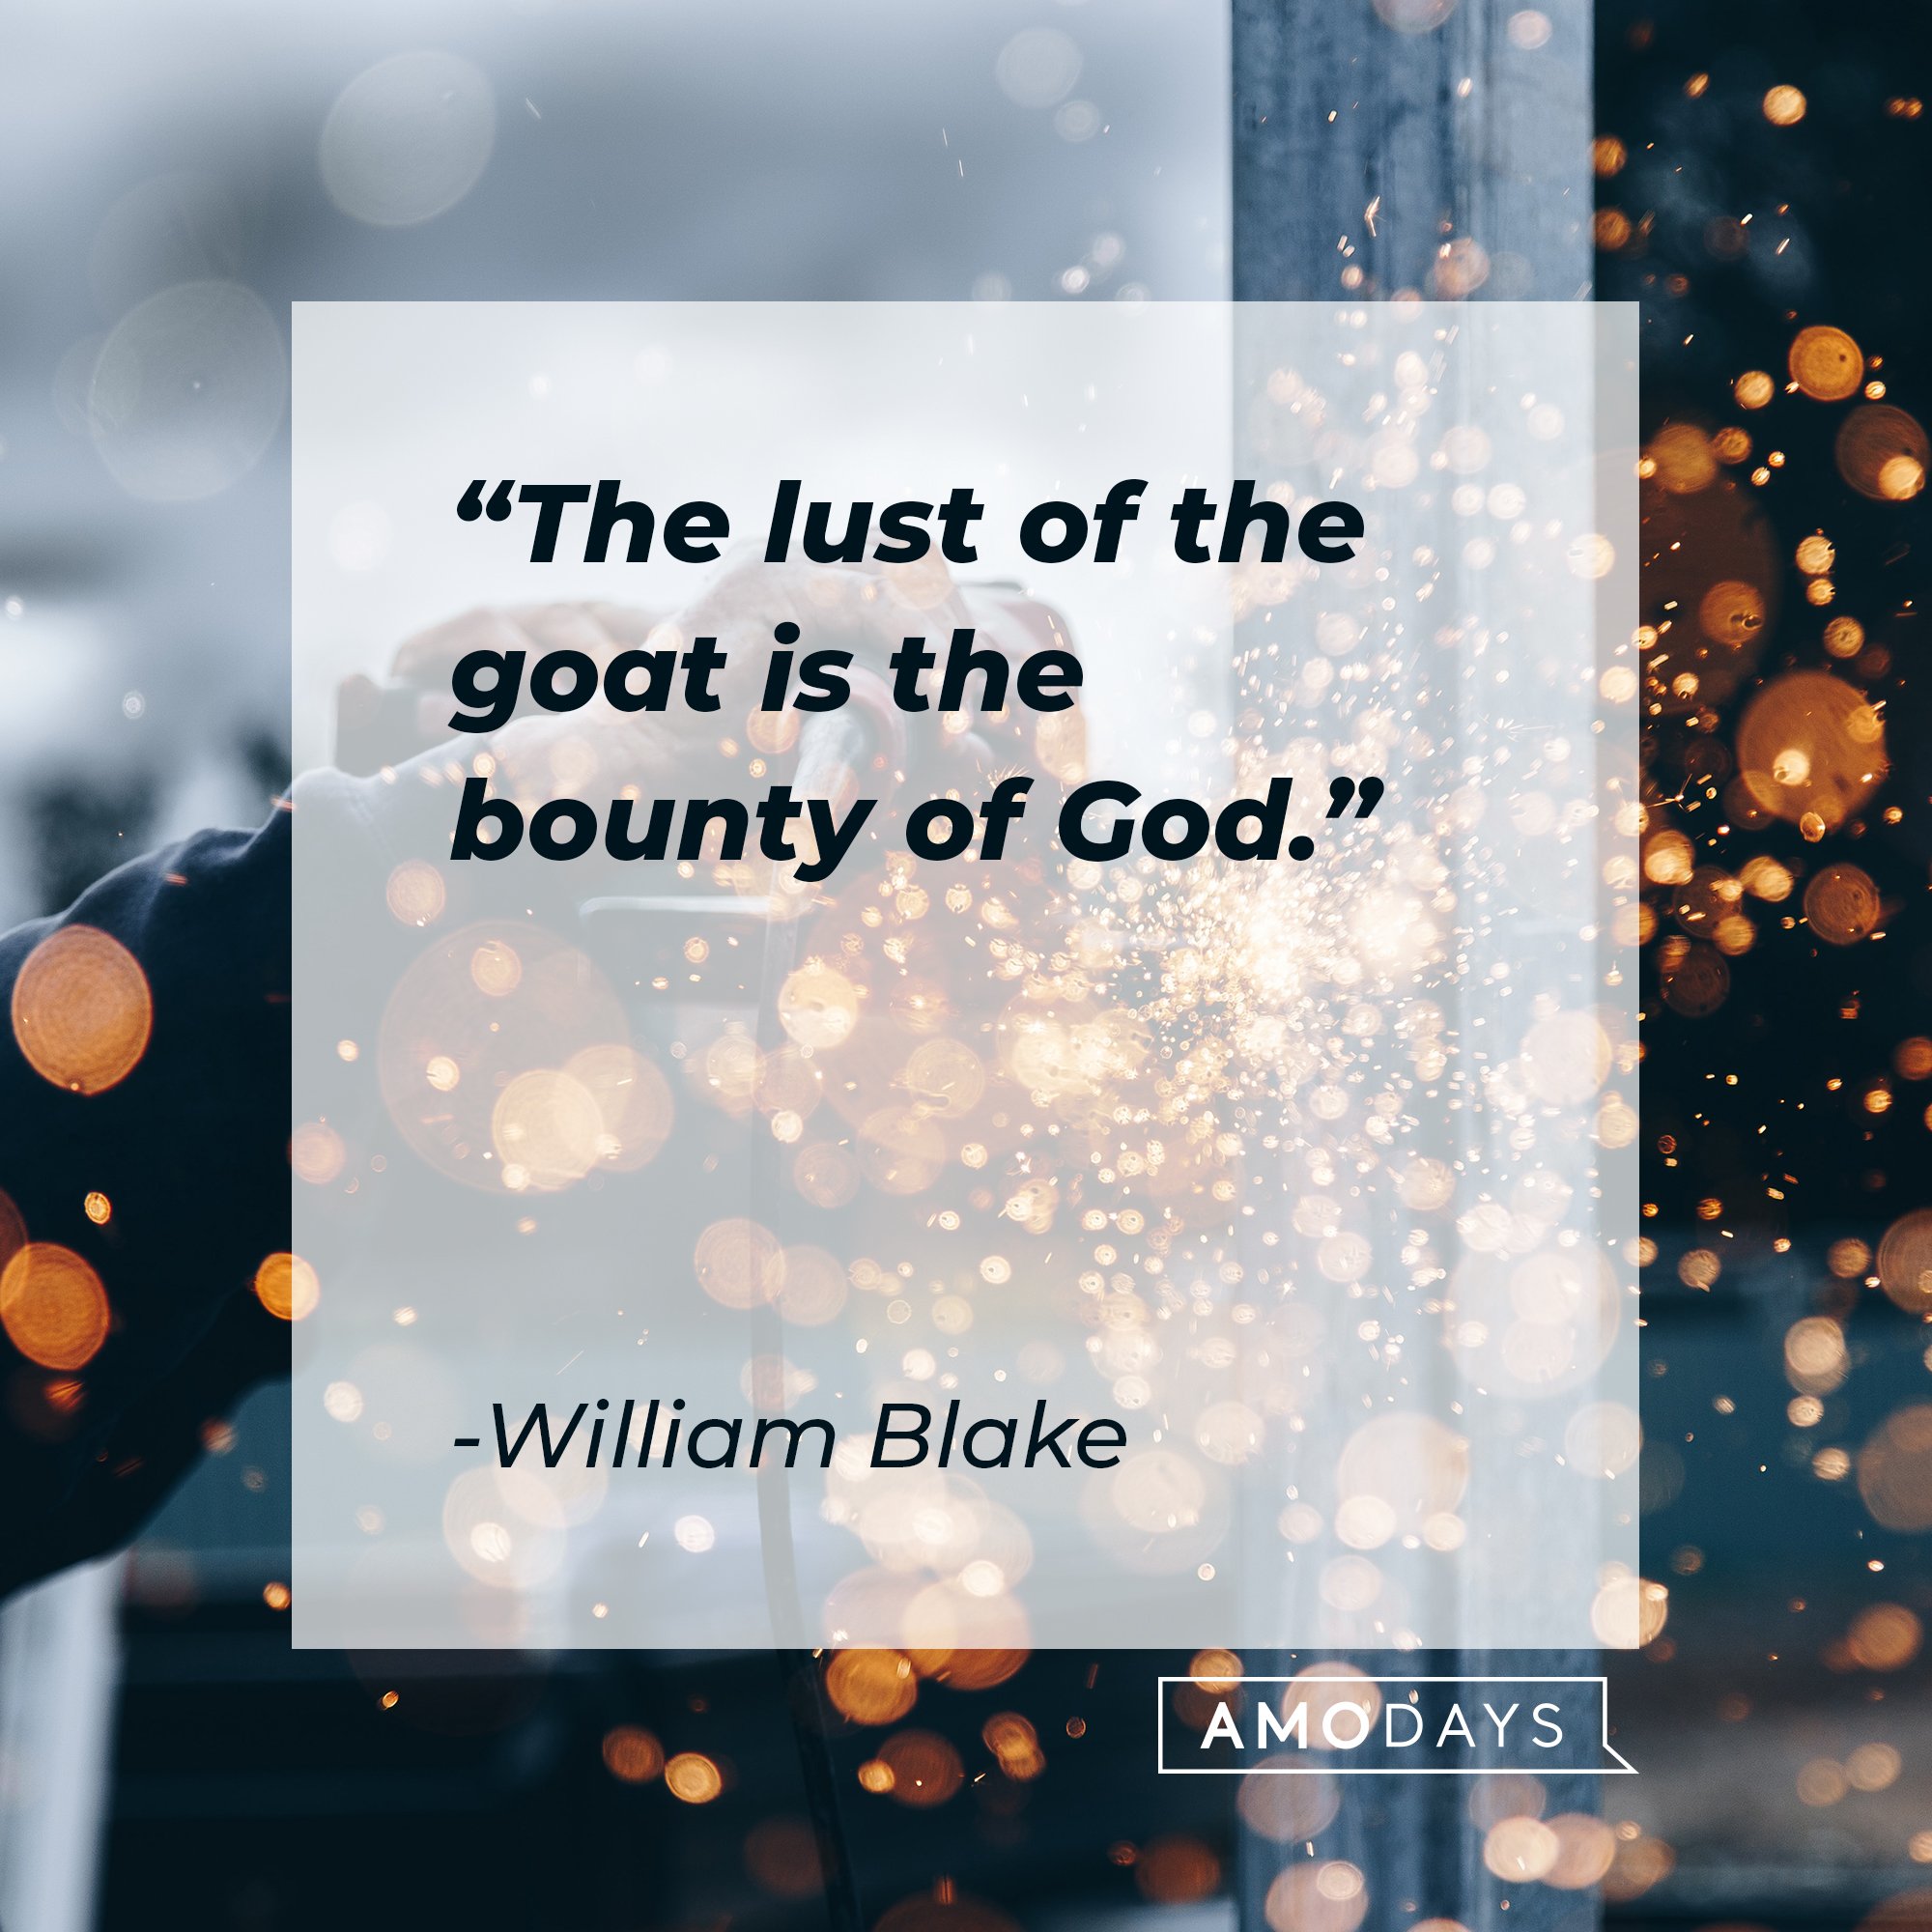 William Blake’s quote: "The lust of the goat is the bounty of God." | Image: AmoDays 